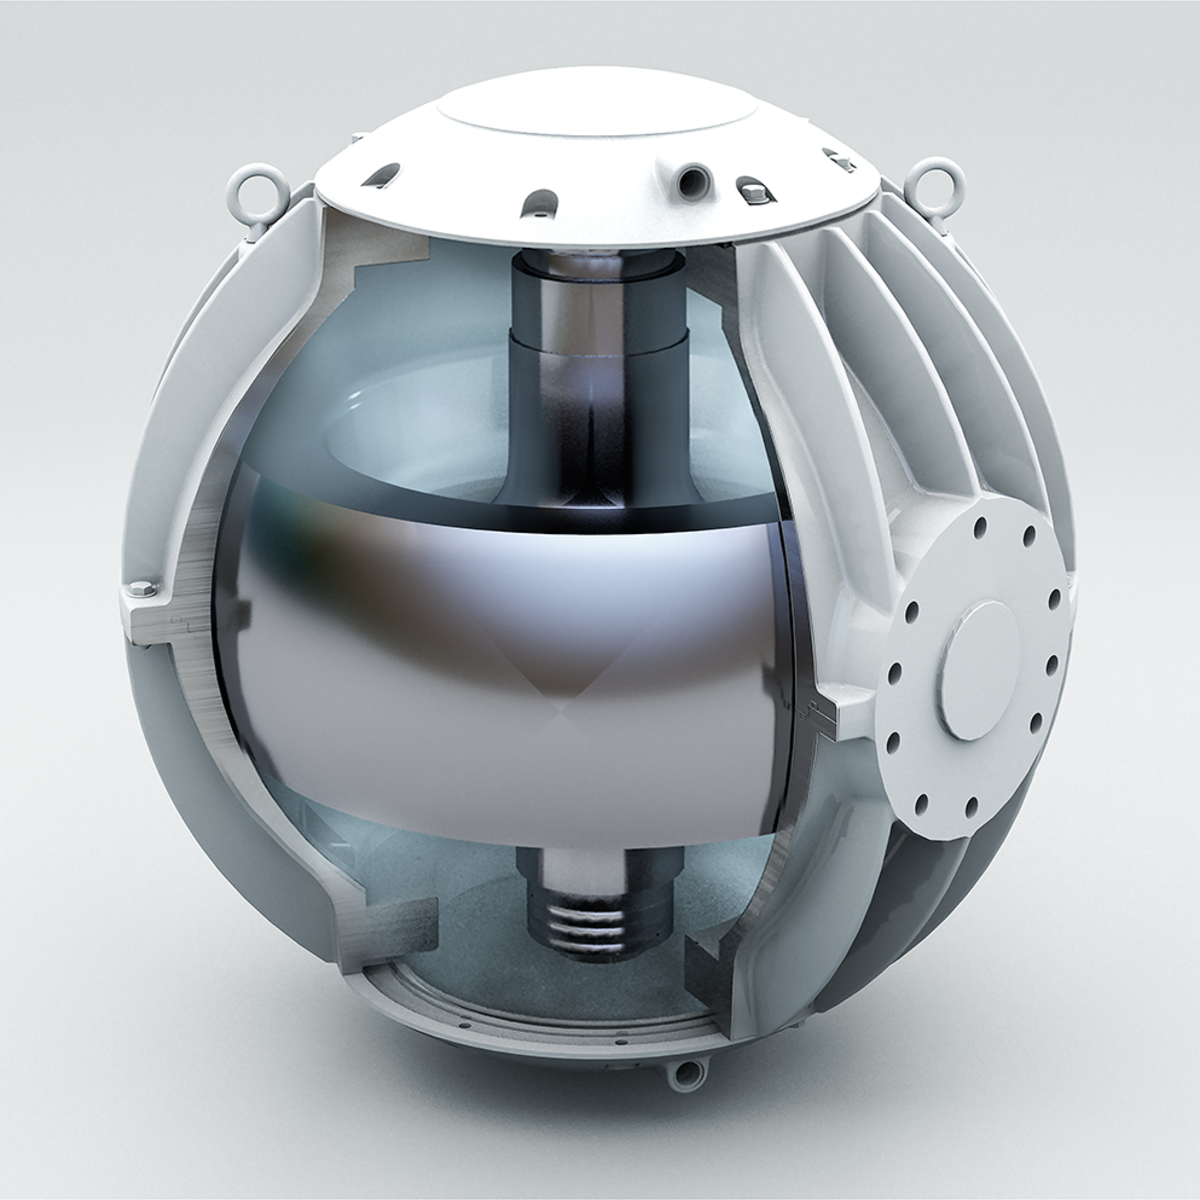 Three-dimensional rendering of the gyro mechanism inside a Seakeeper stabilizer. 